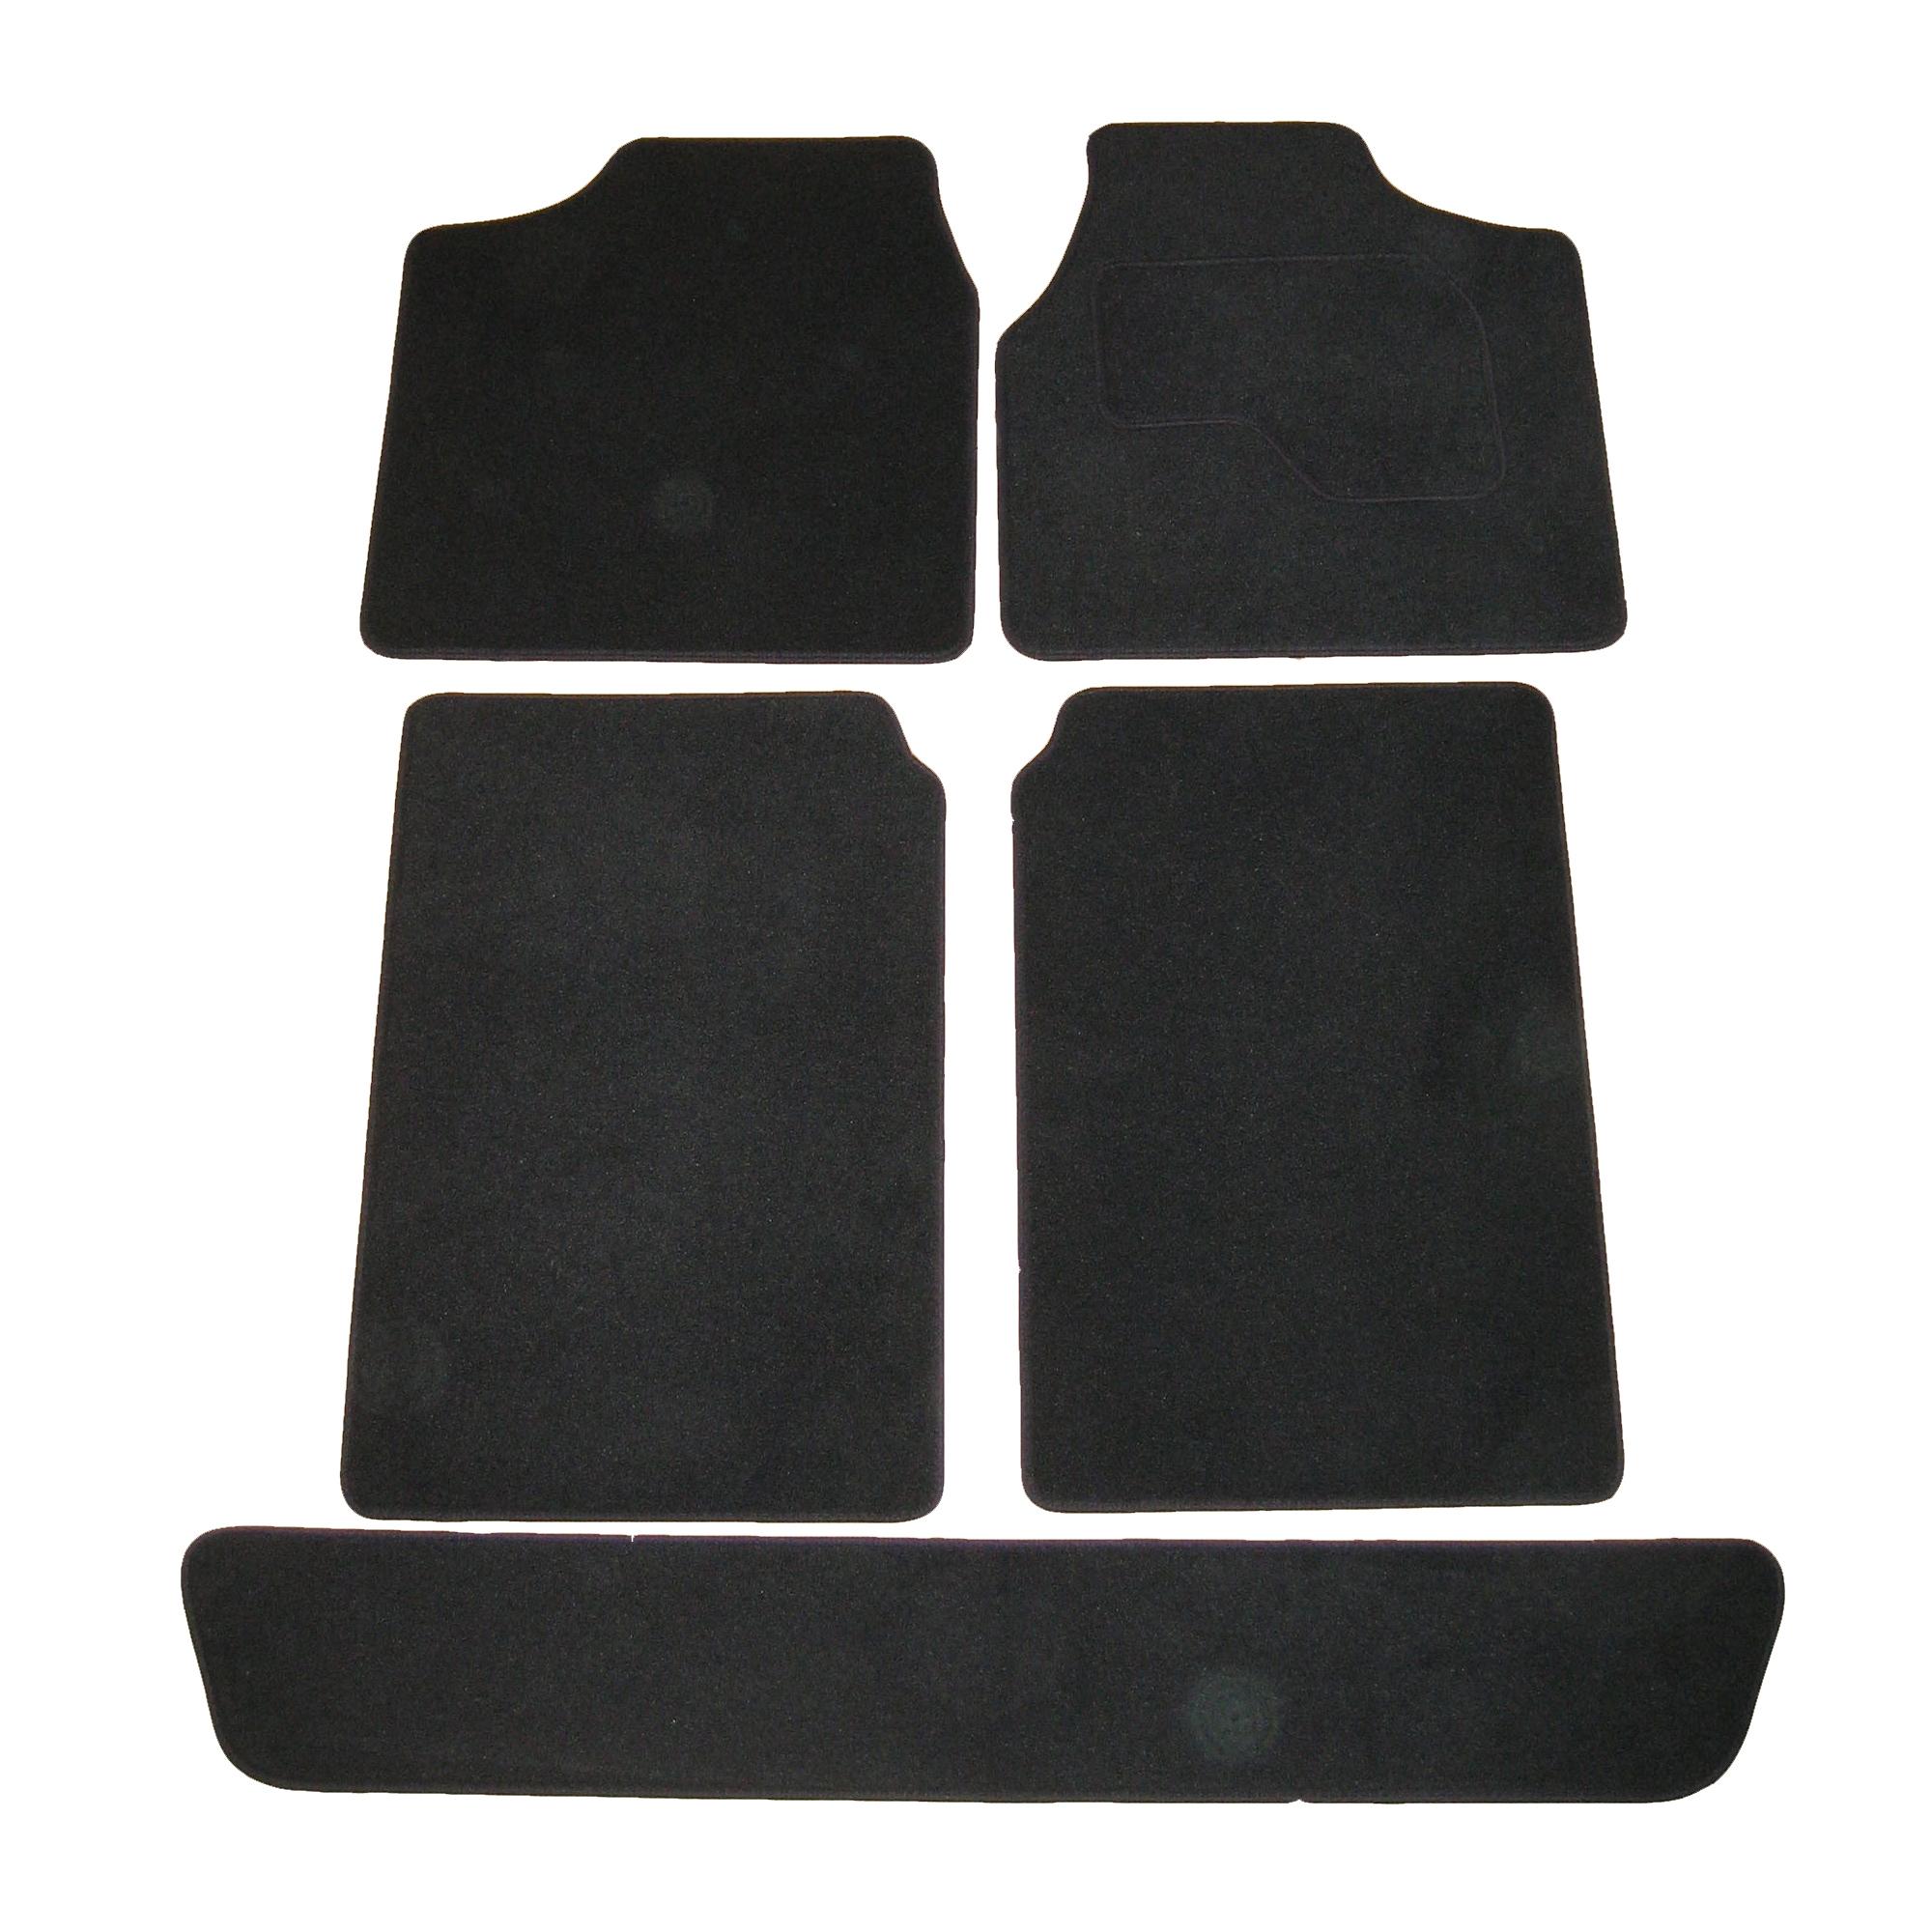 Chrysler Voyager - Luxury Mats 0 Clips (Ss1557)